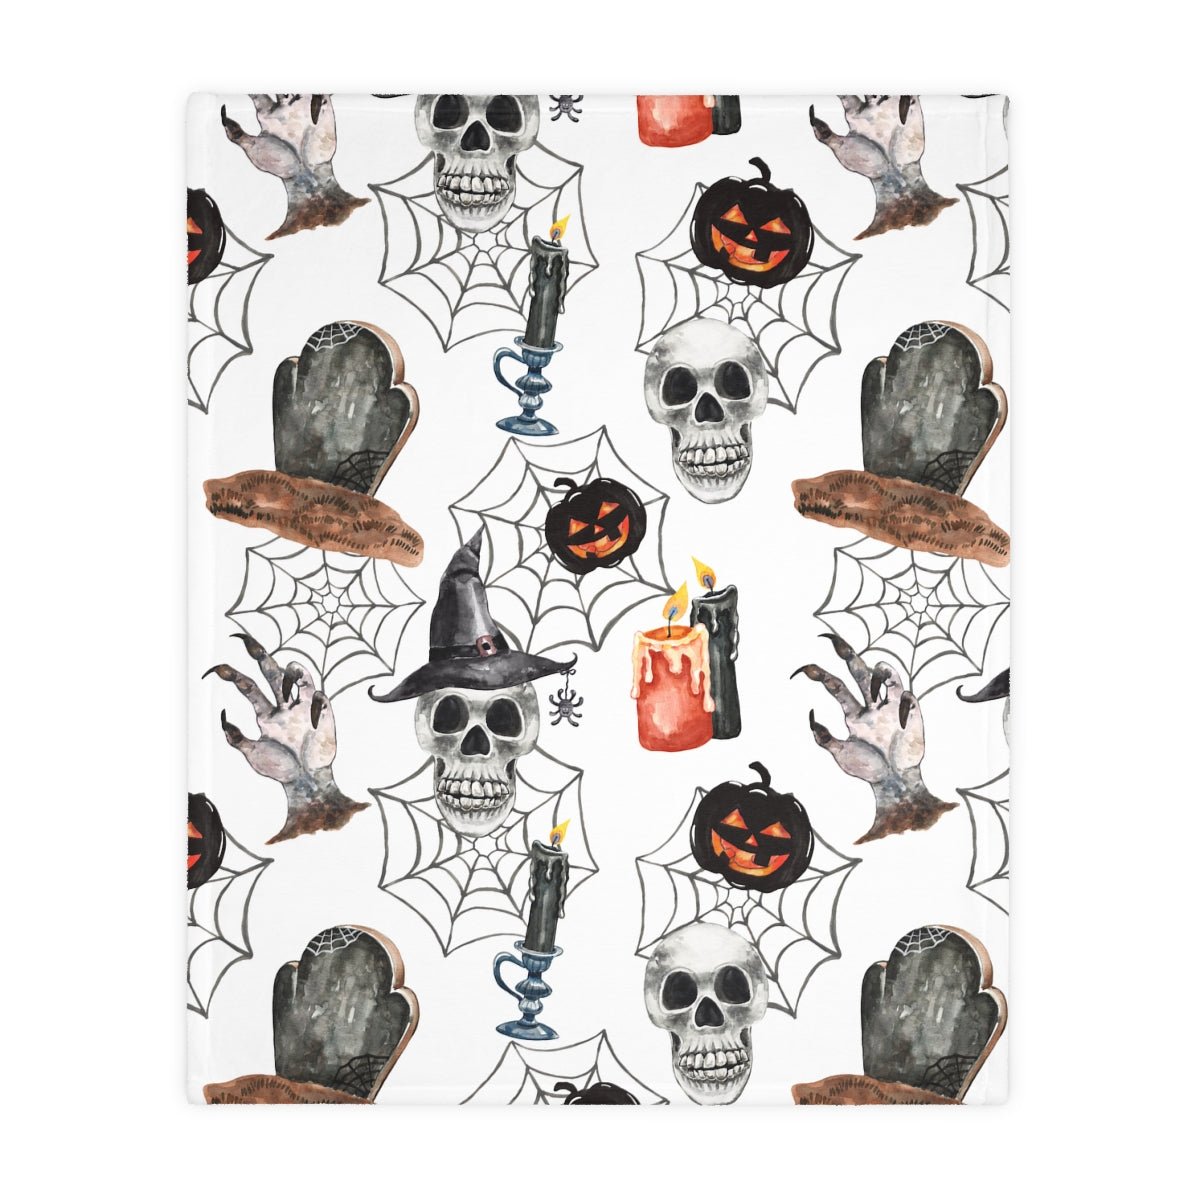 Skulls and Pumpkins Velveteen Minky Blanket (Two-sided print) - Puffin Lime